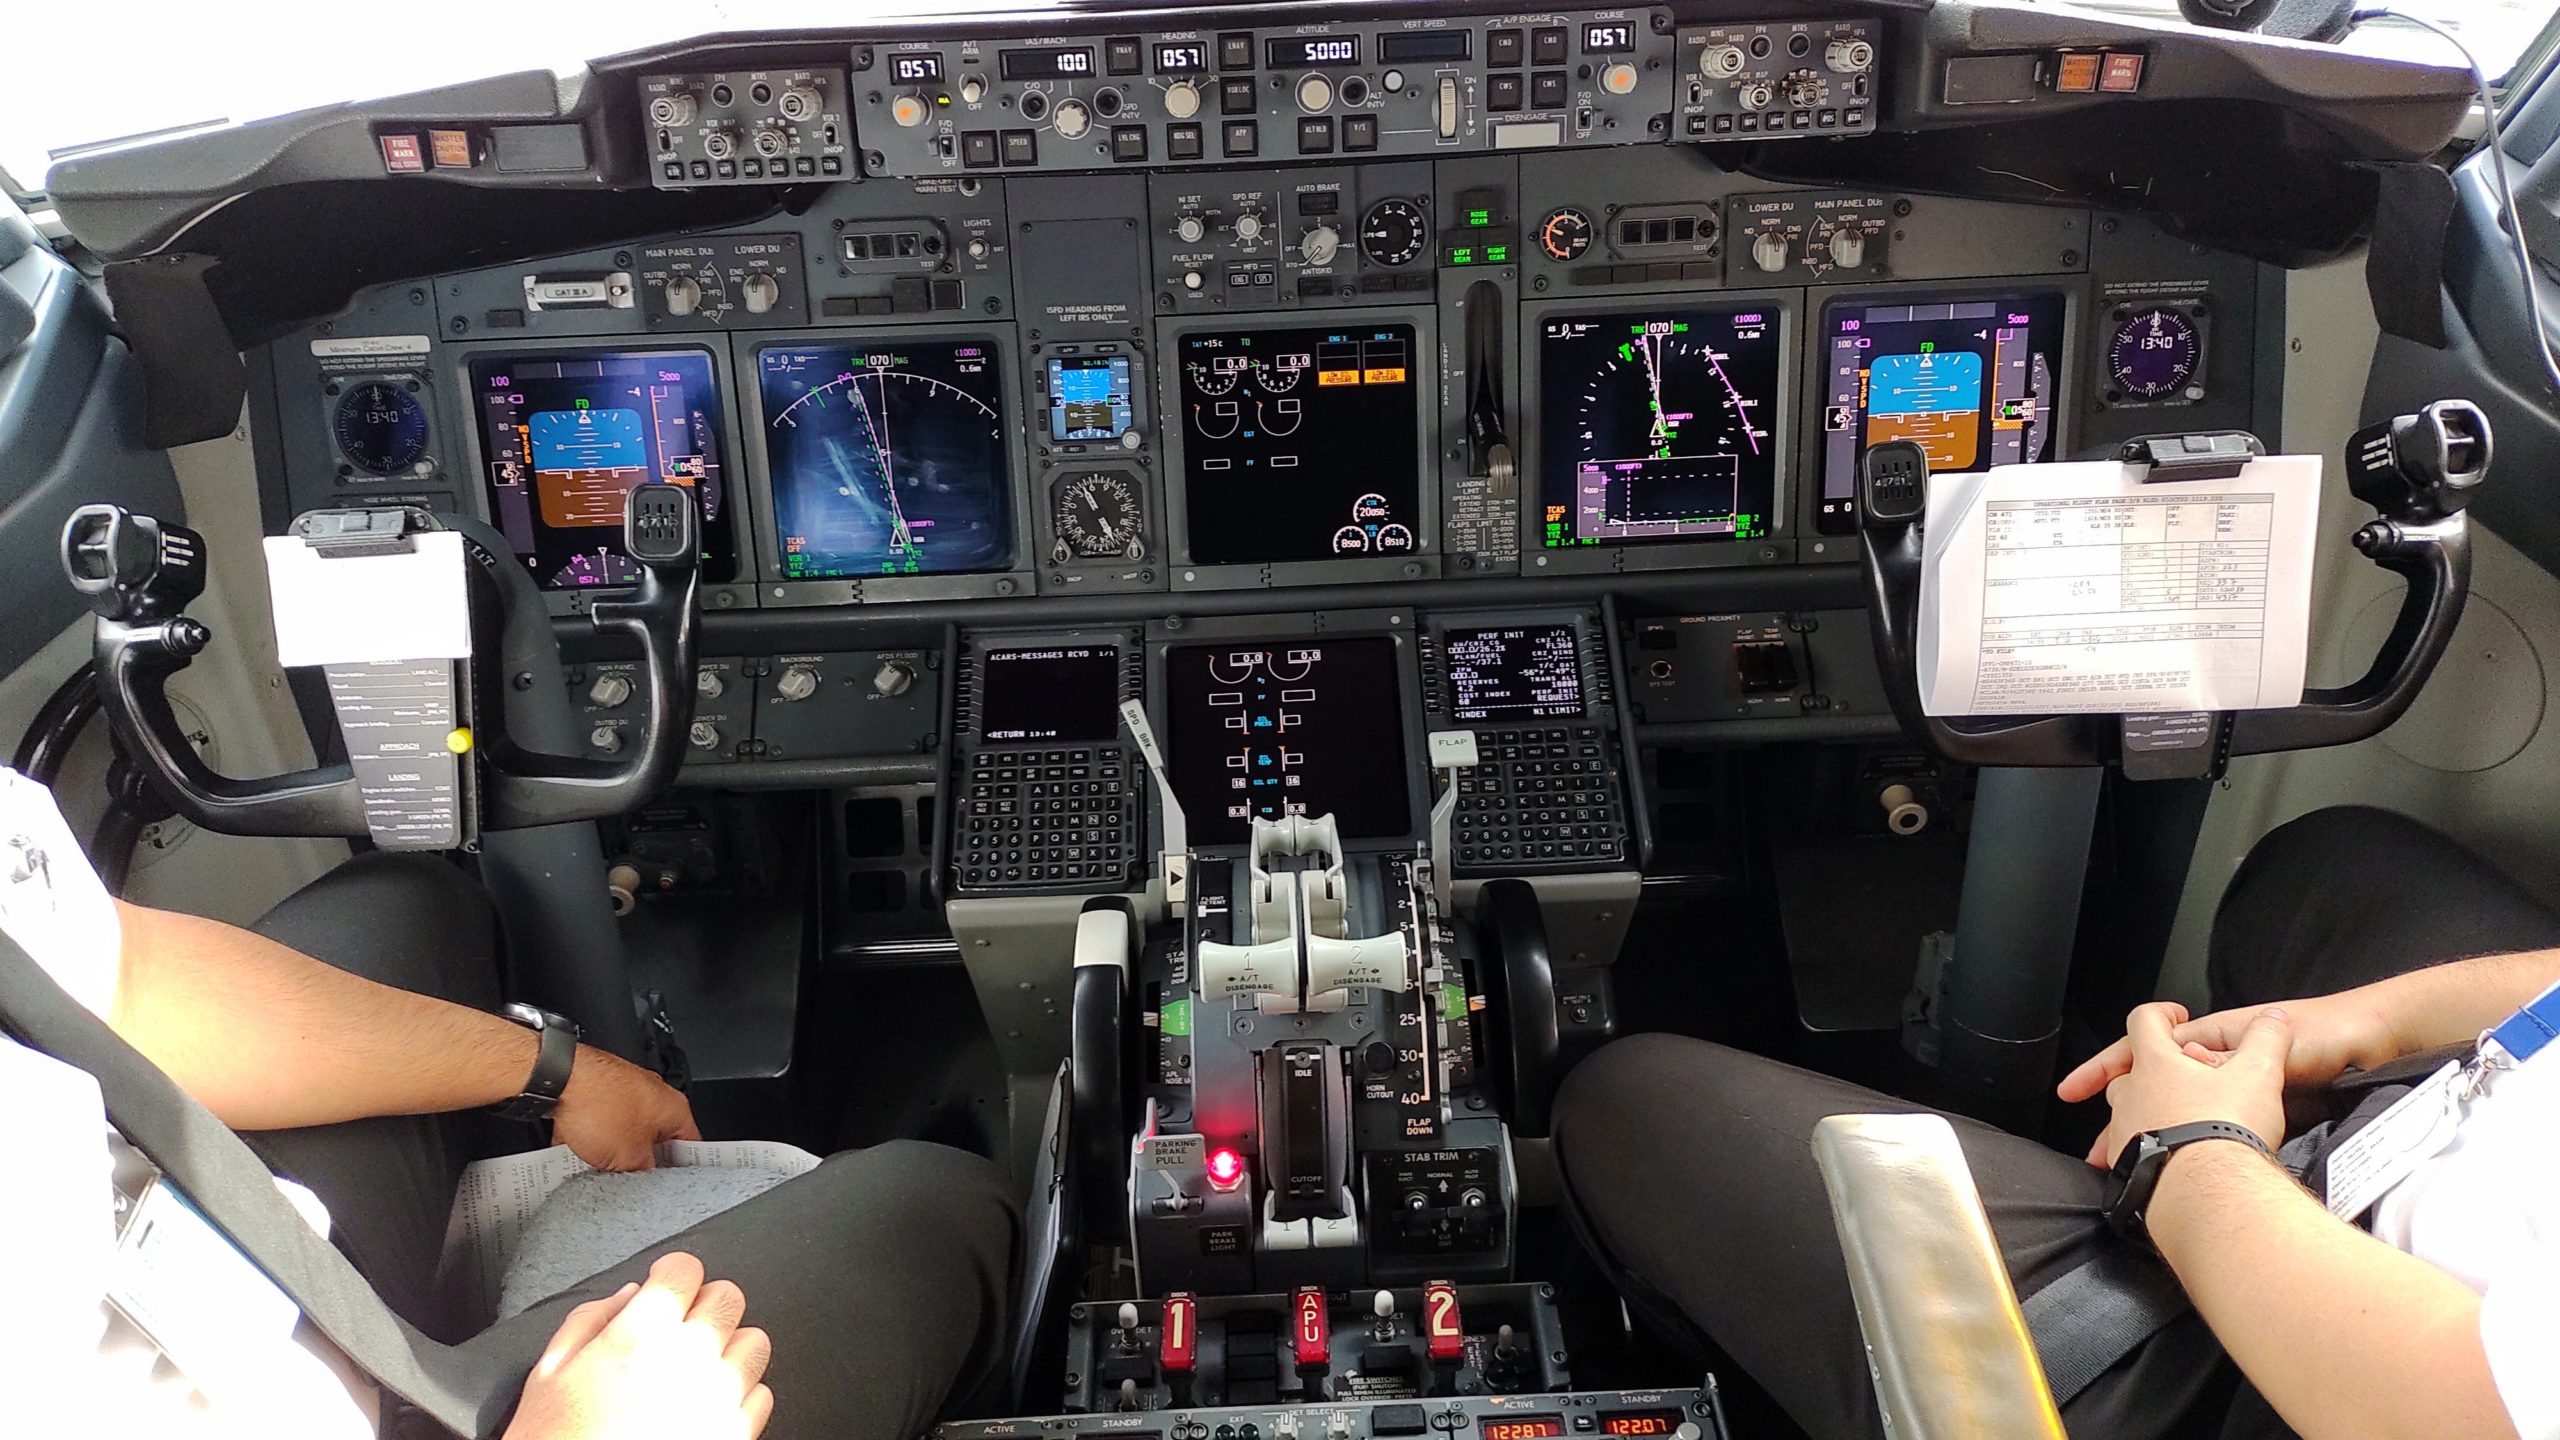 PICTURE OF THE COPA 737 COCKPIT